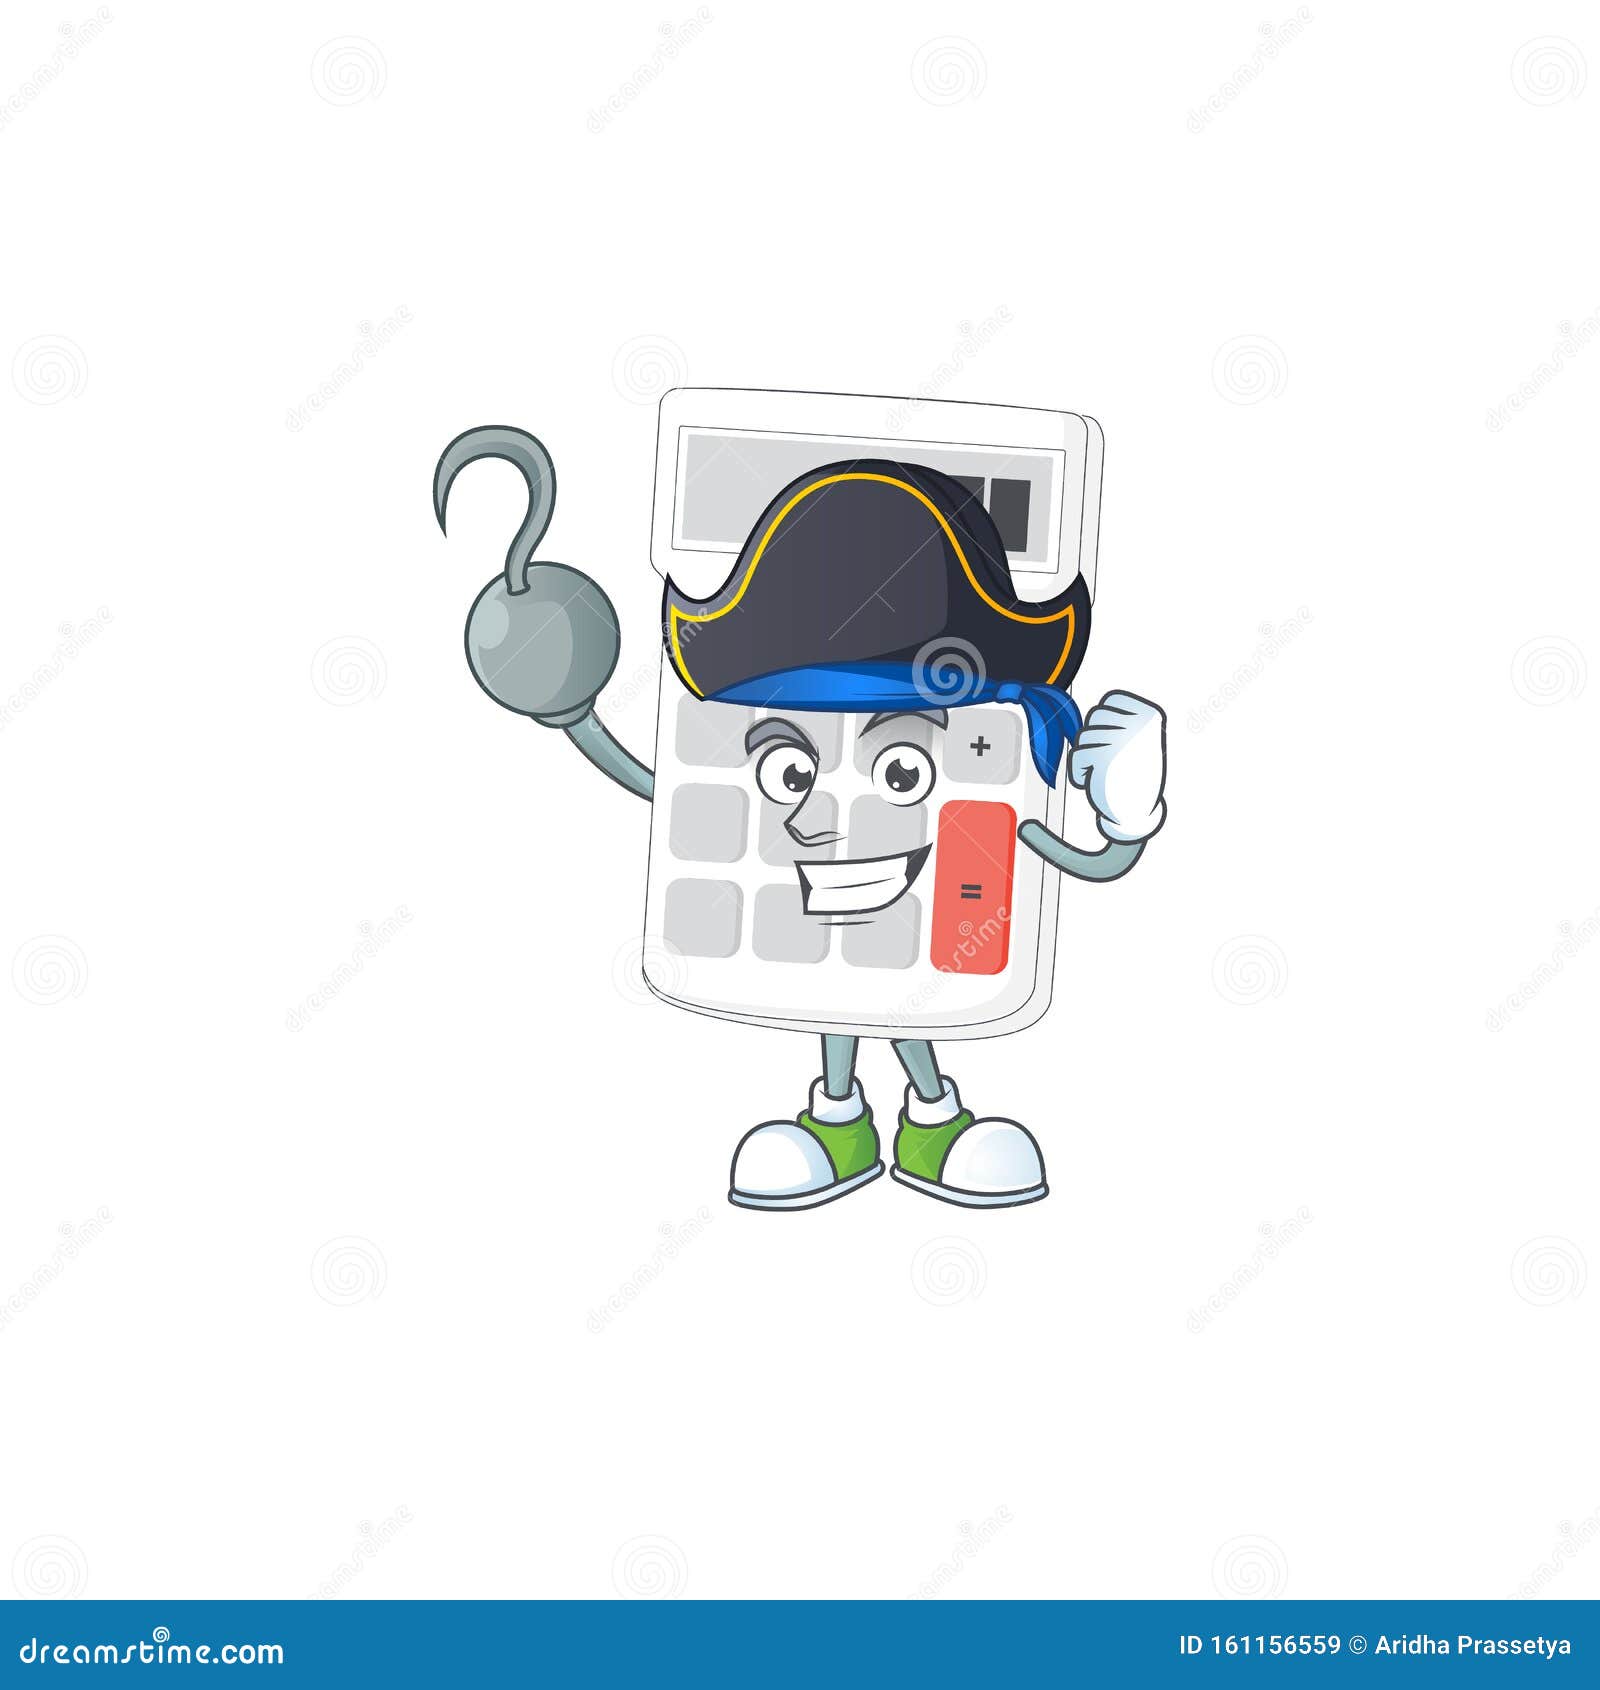 https://thumbs.dreamstime.com/z/pirate-icon-calculator-concept-accounting-vector-illustration-161156559.jpg